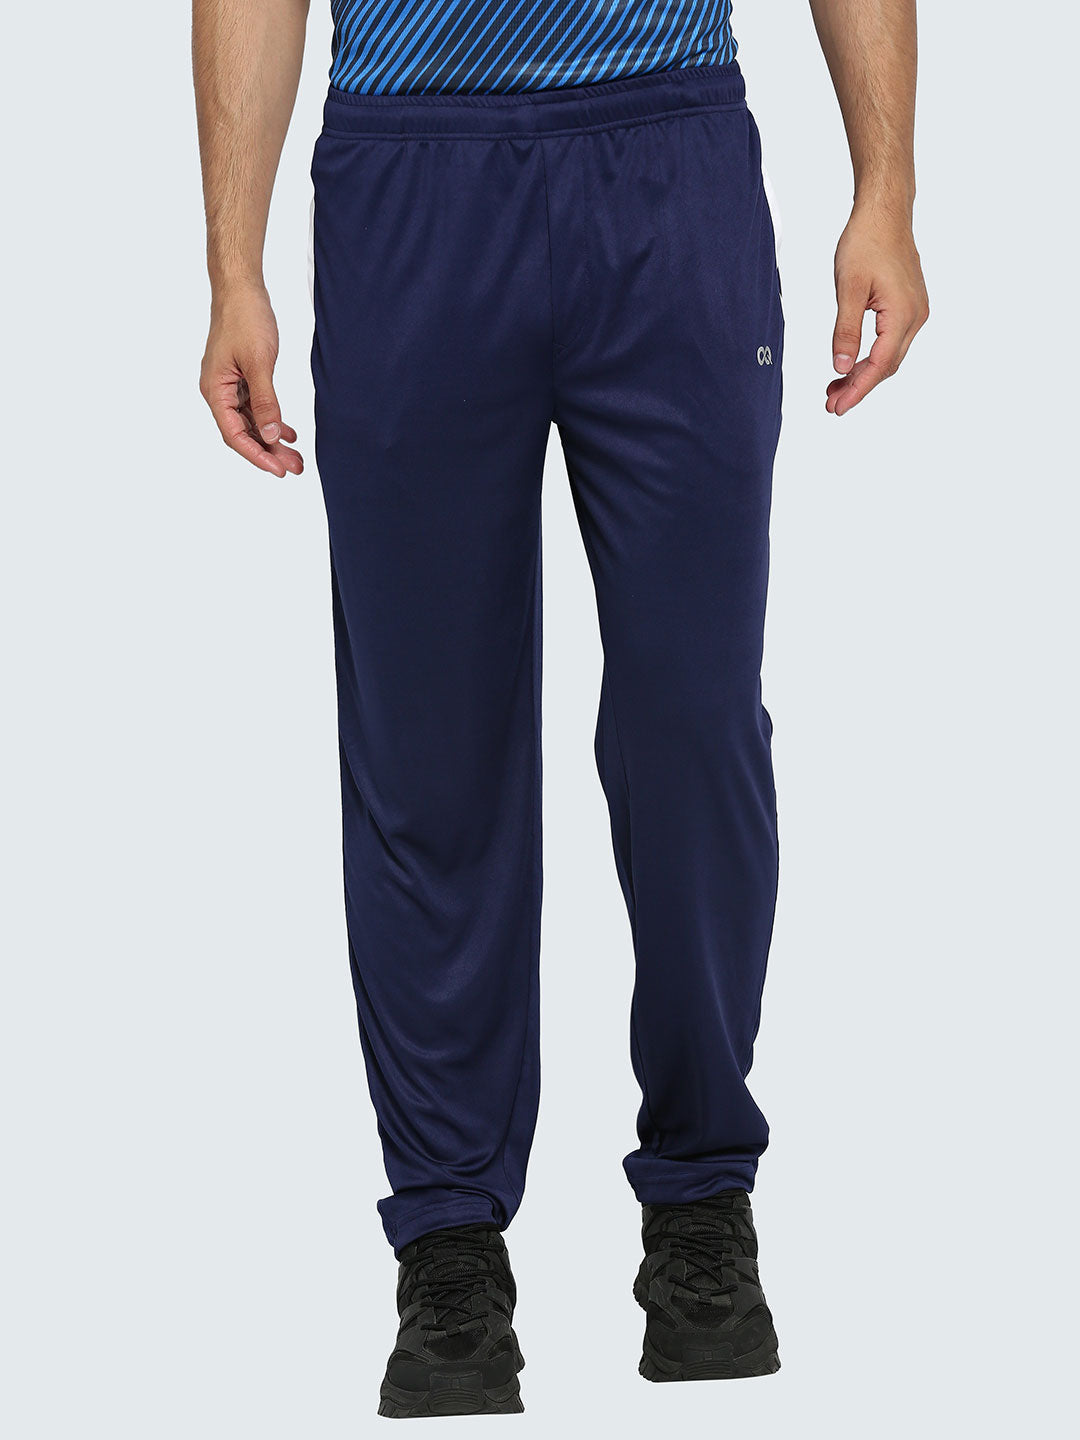 Buy Men White Supreme Cricket Track Pant From Fancode Shop.